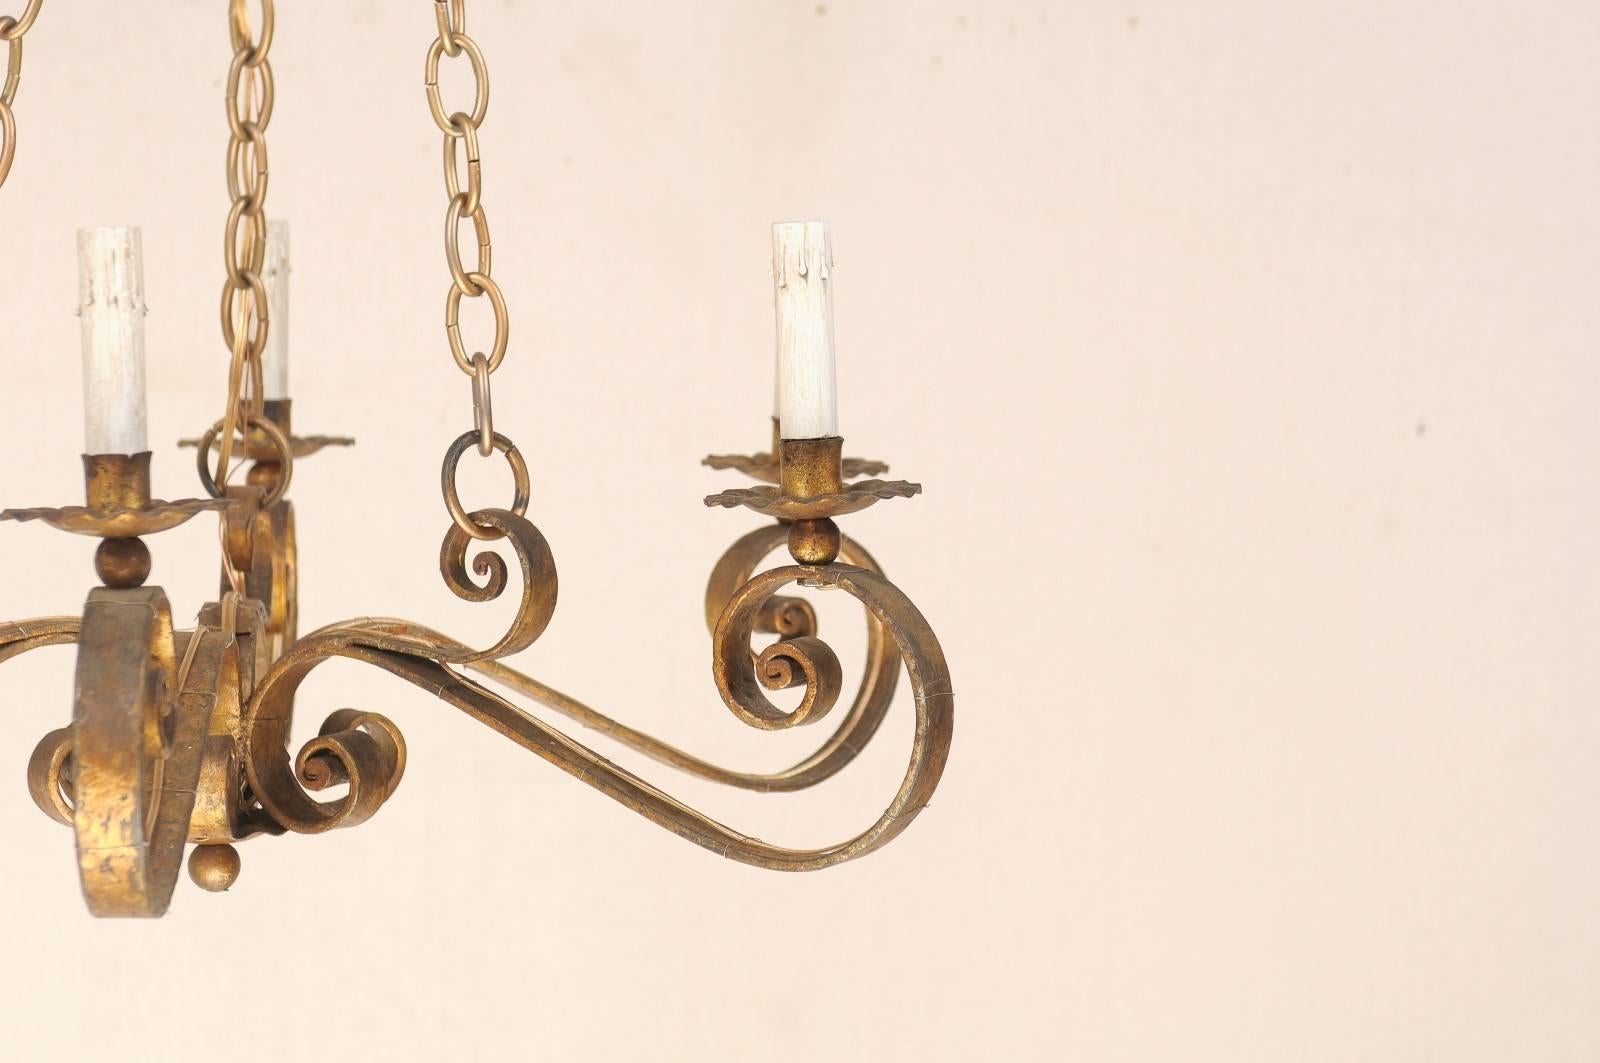 Spanish Gilded Iron 19th Century Six-Light Chandelier with Scroll Arms 1